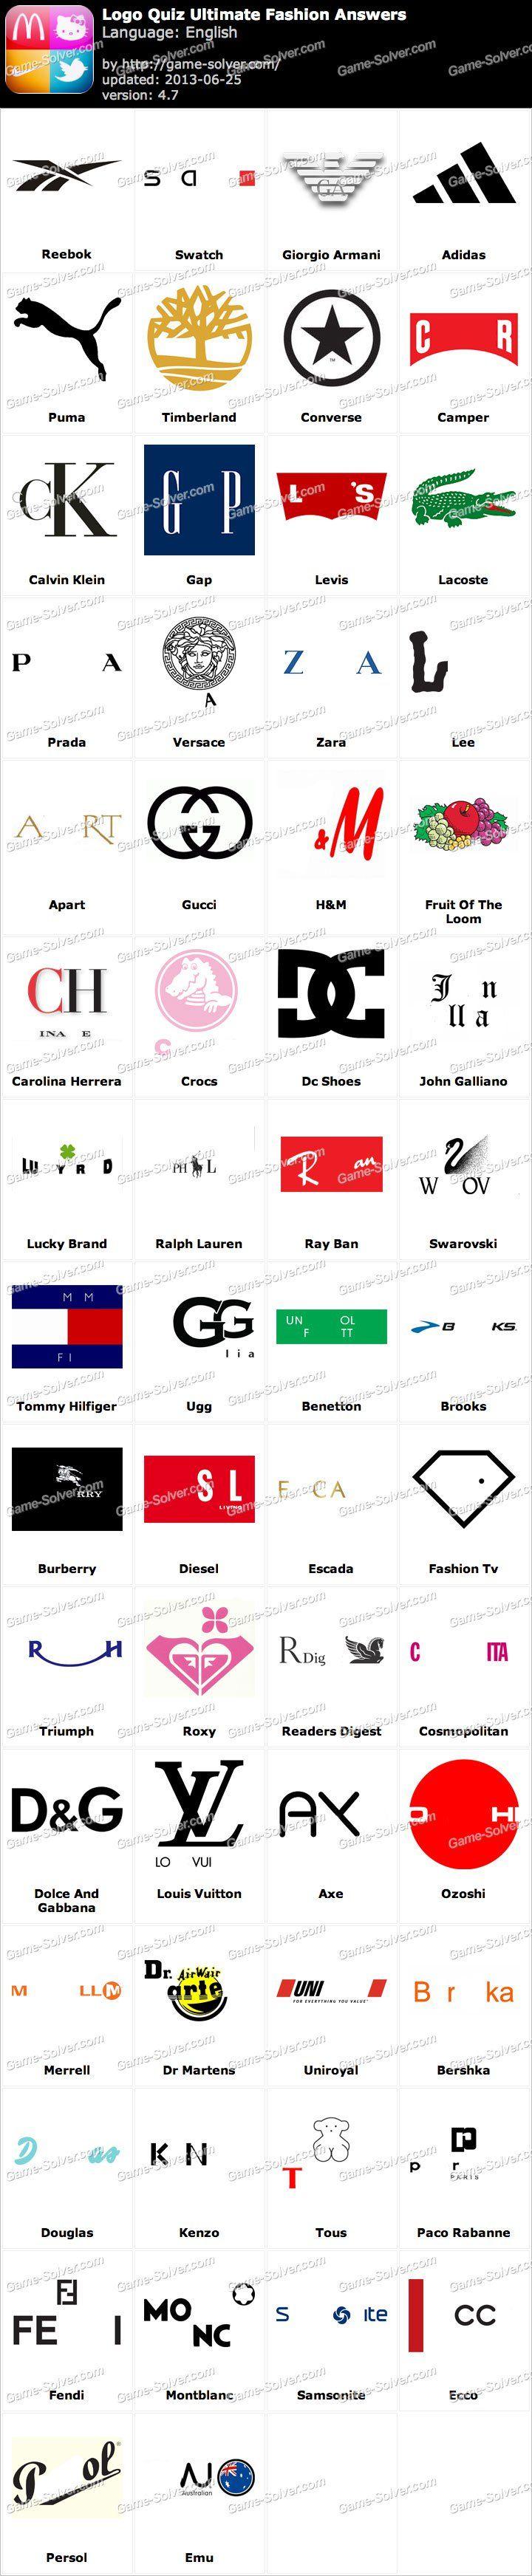 Athletic Clothing Companies and Apparel Logo - Logo Quiz Ultimate Fashion Answers - Game Solver